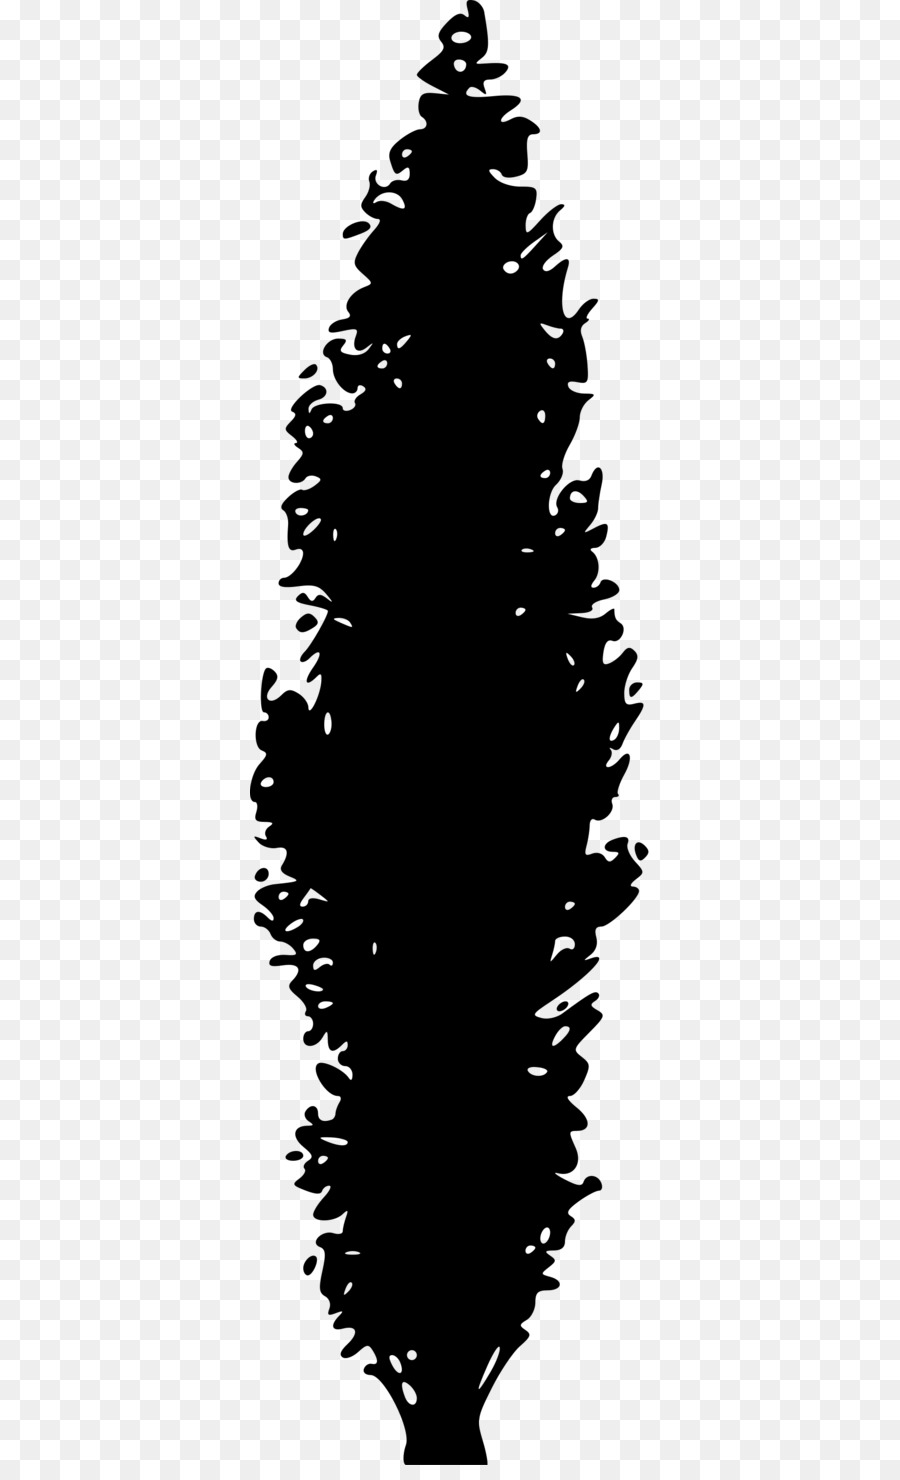 Pine Tree Conifers Evergreen Clip art - bush Silhouette png download - 400*1465 - Free Transparent Pine png Download.